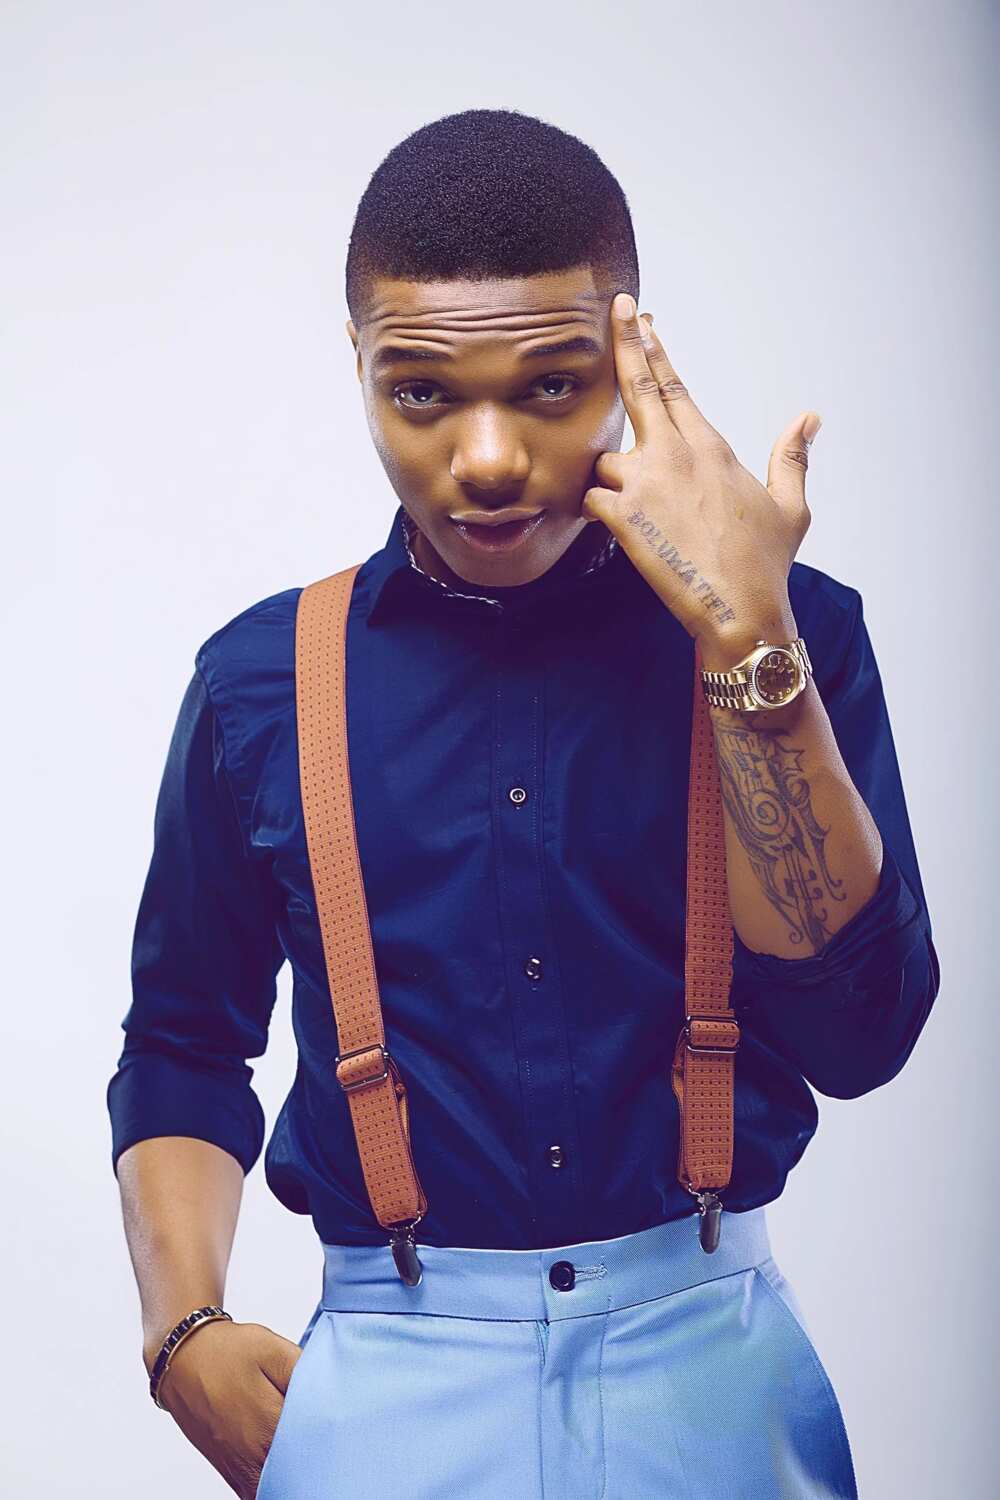 Wizkid makes list of 12 innovative humans with coolest sounds